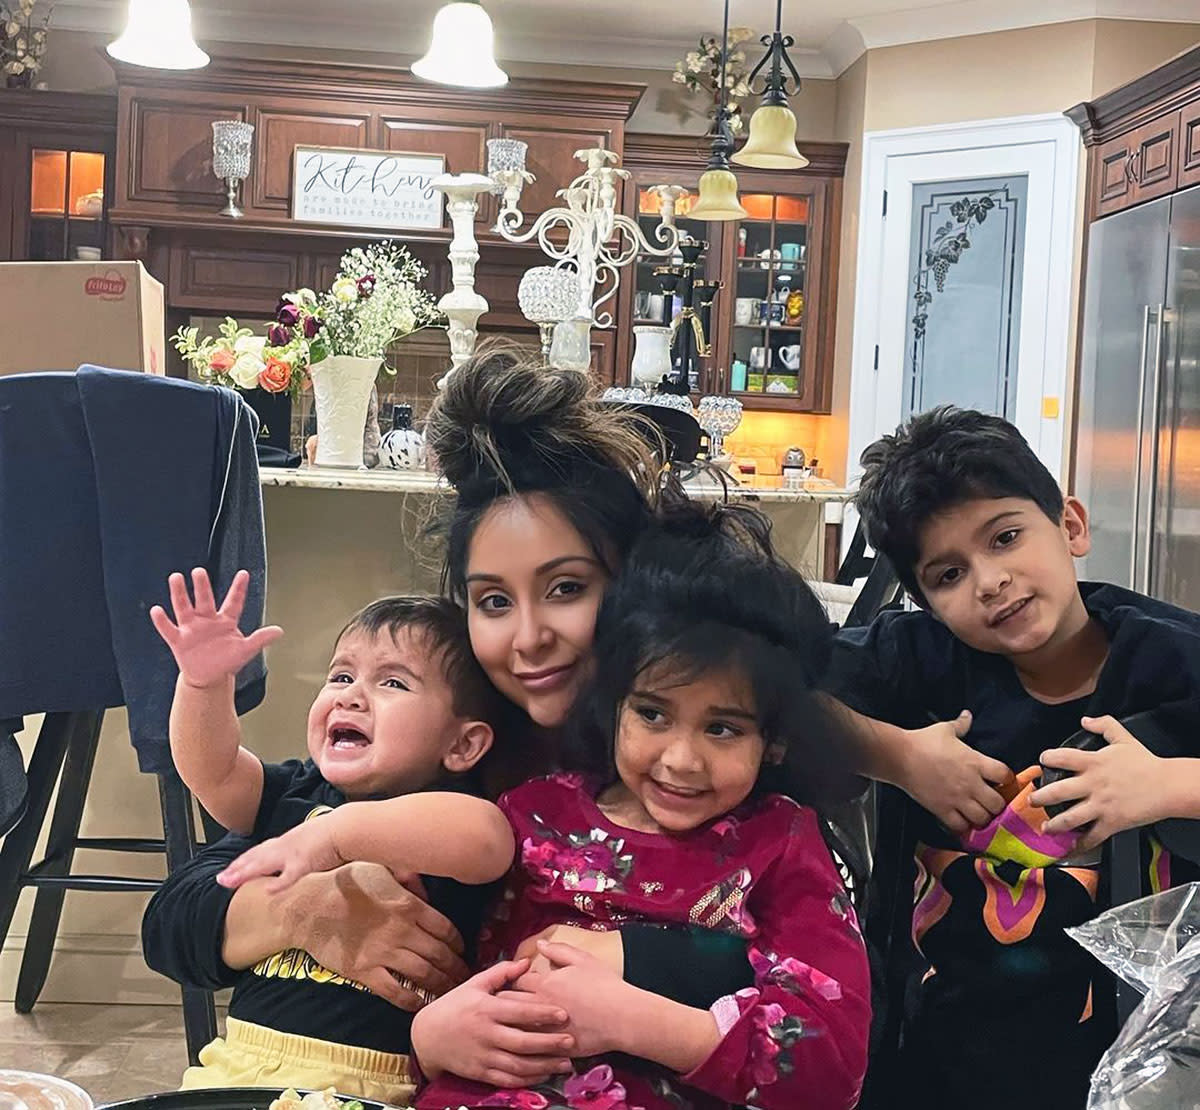 Nicole ‘Snooki’ Polizzi's Kids Think She's an ‘Actress’ and ‘Jersey Shore’ Isn’t ‘Real'